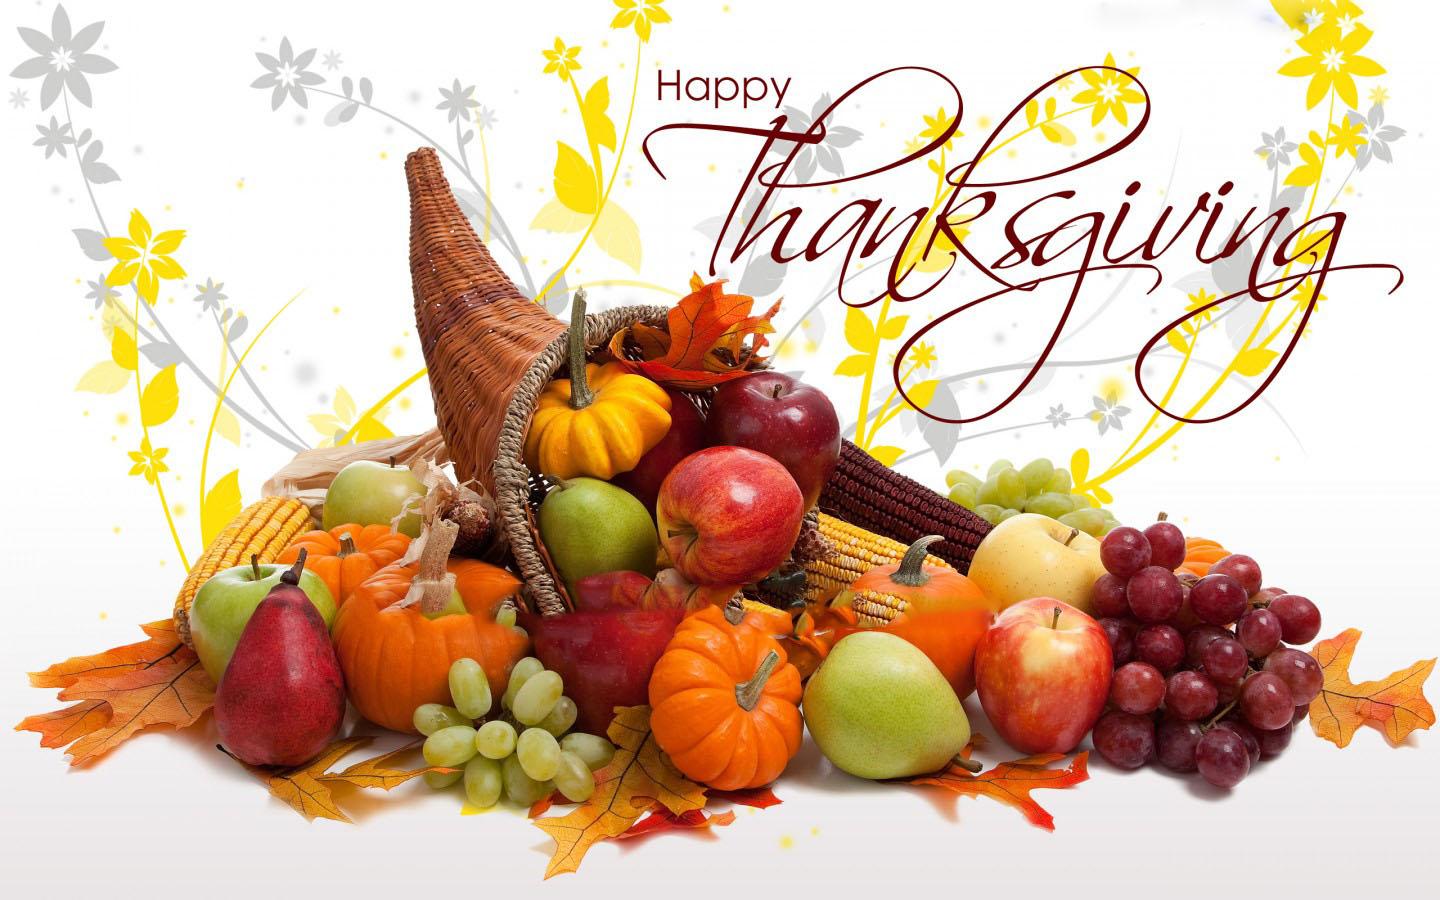 Happy Thanksgiving Image Wallpaper Pictures